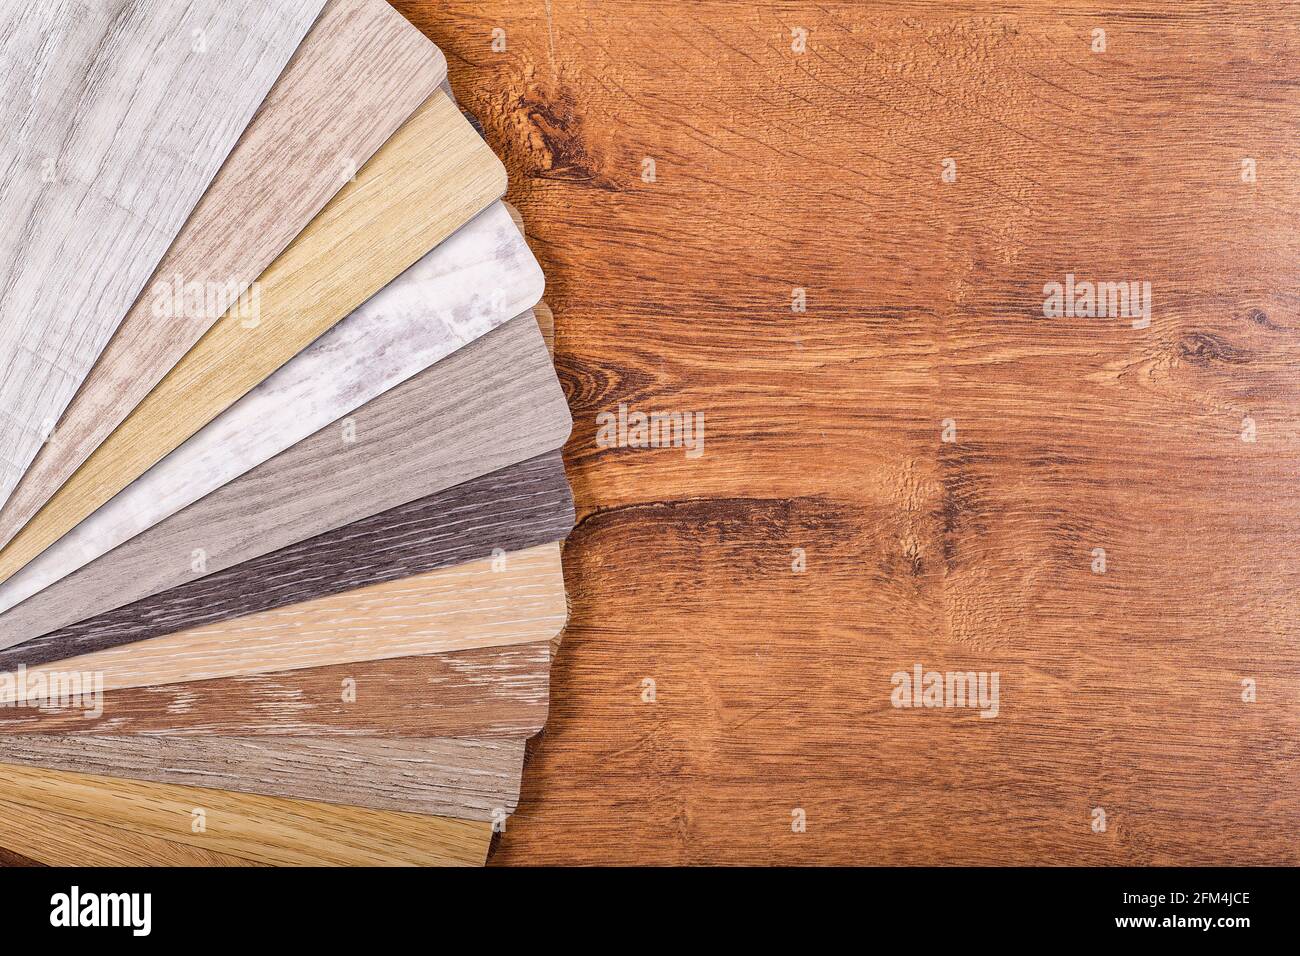 Vinyl and linoleum samples on a white isolated background. Vinyl for flooring with wood grain texture and pattern. High quality photo Stock Photo